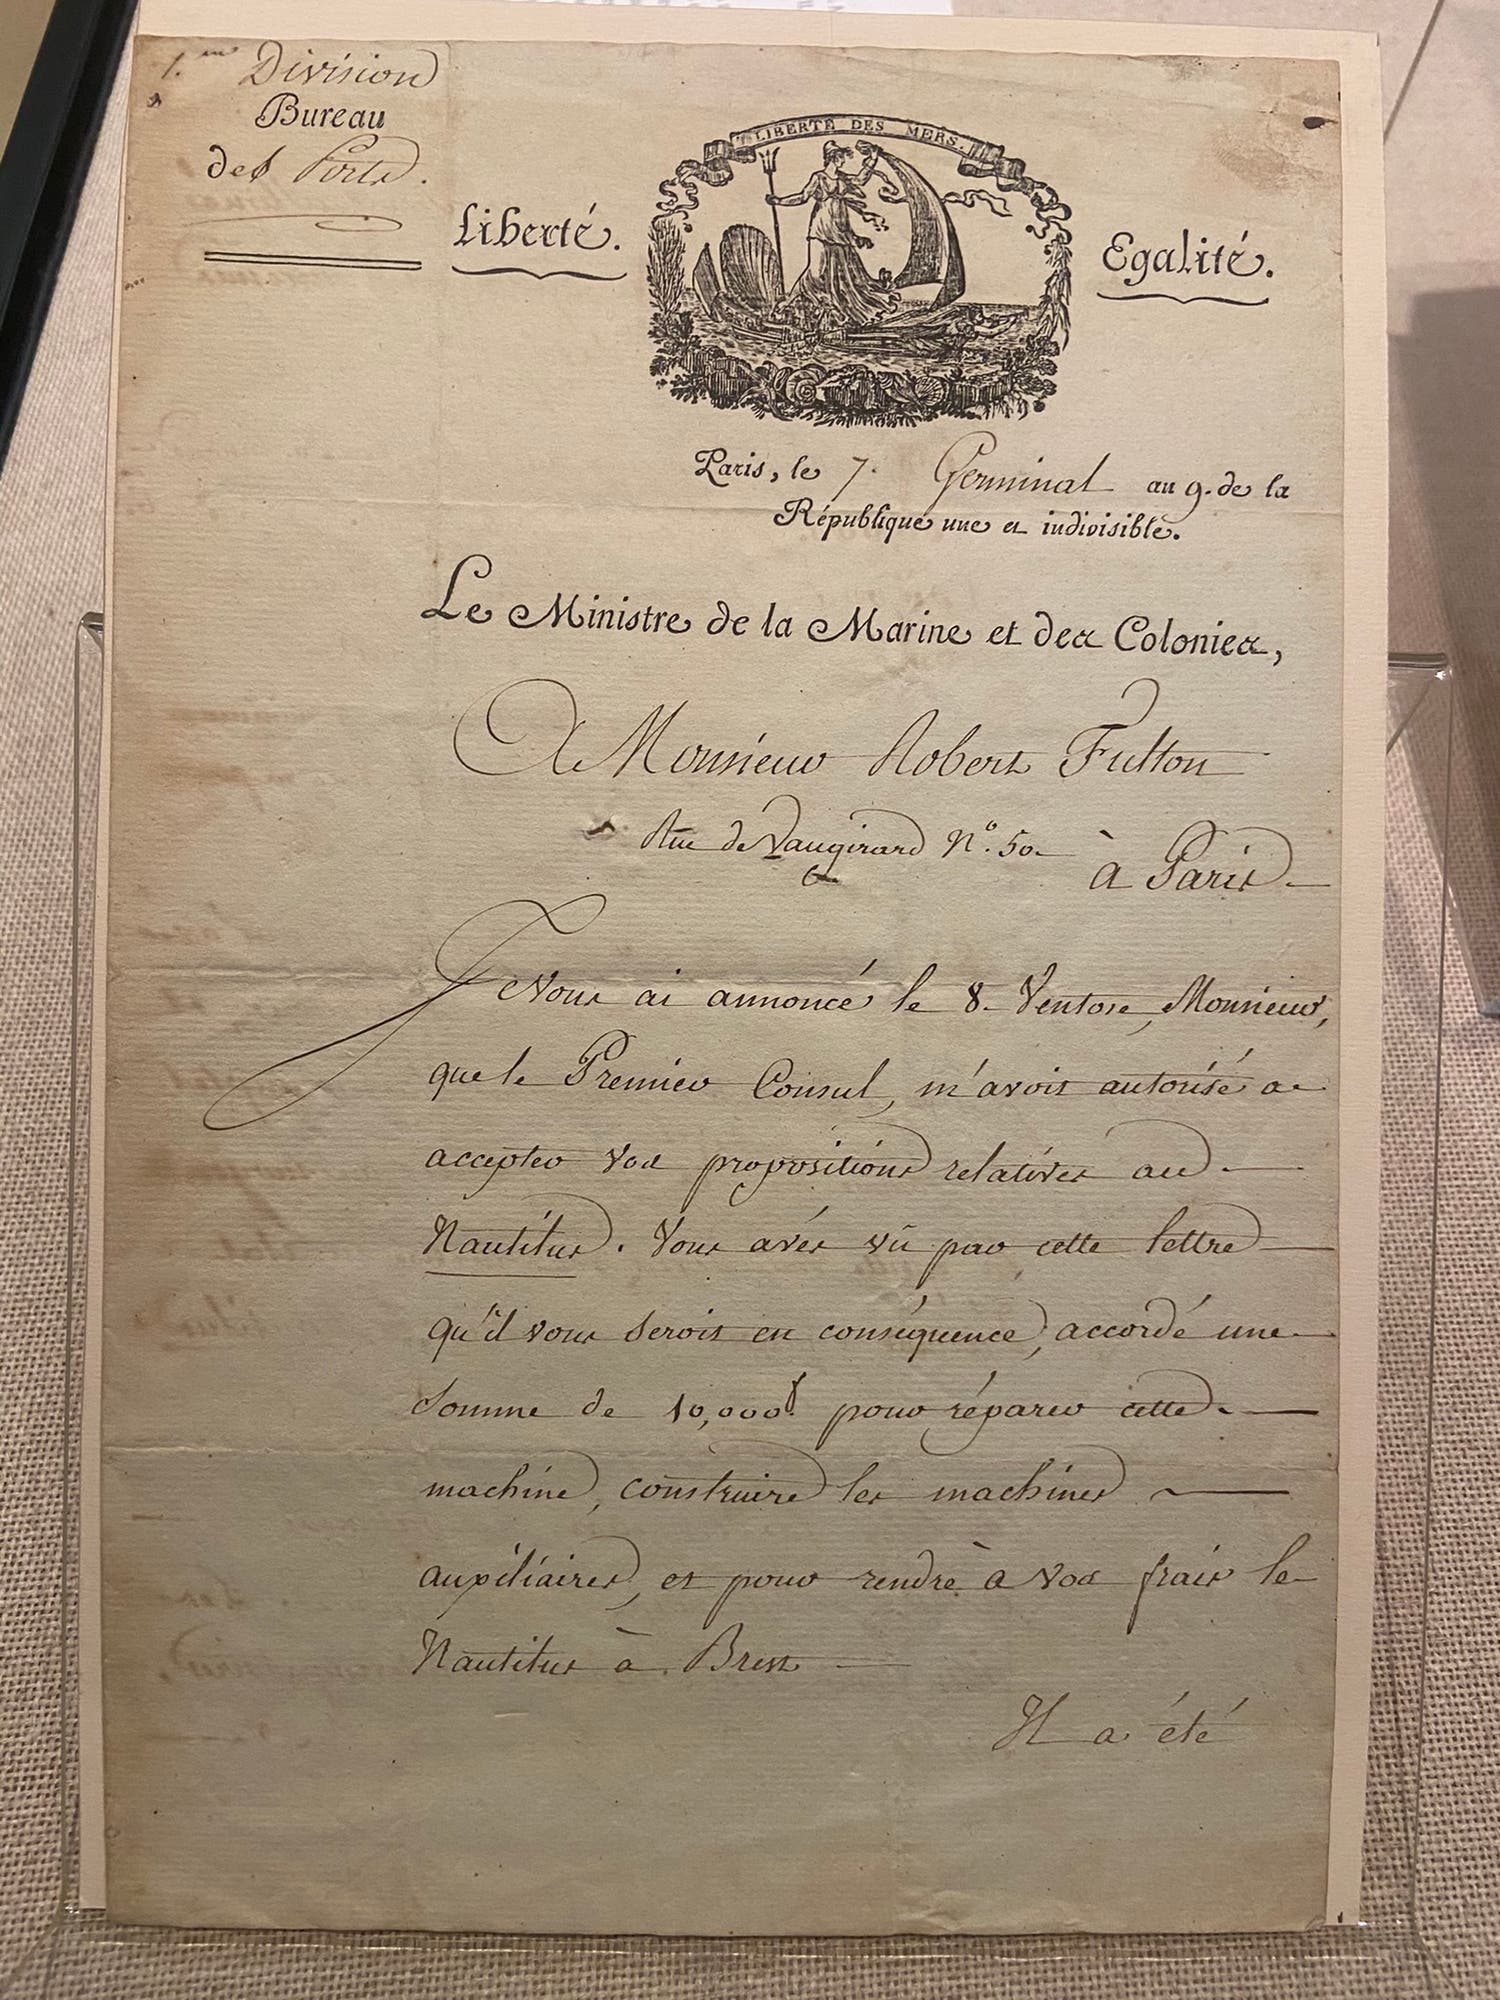 Photo of a letter from Pierre-Alexandre-Laurent Forfait to Robert Fulton